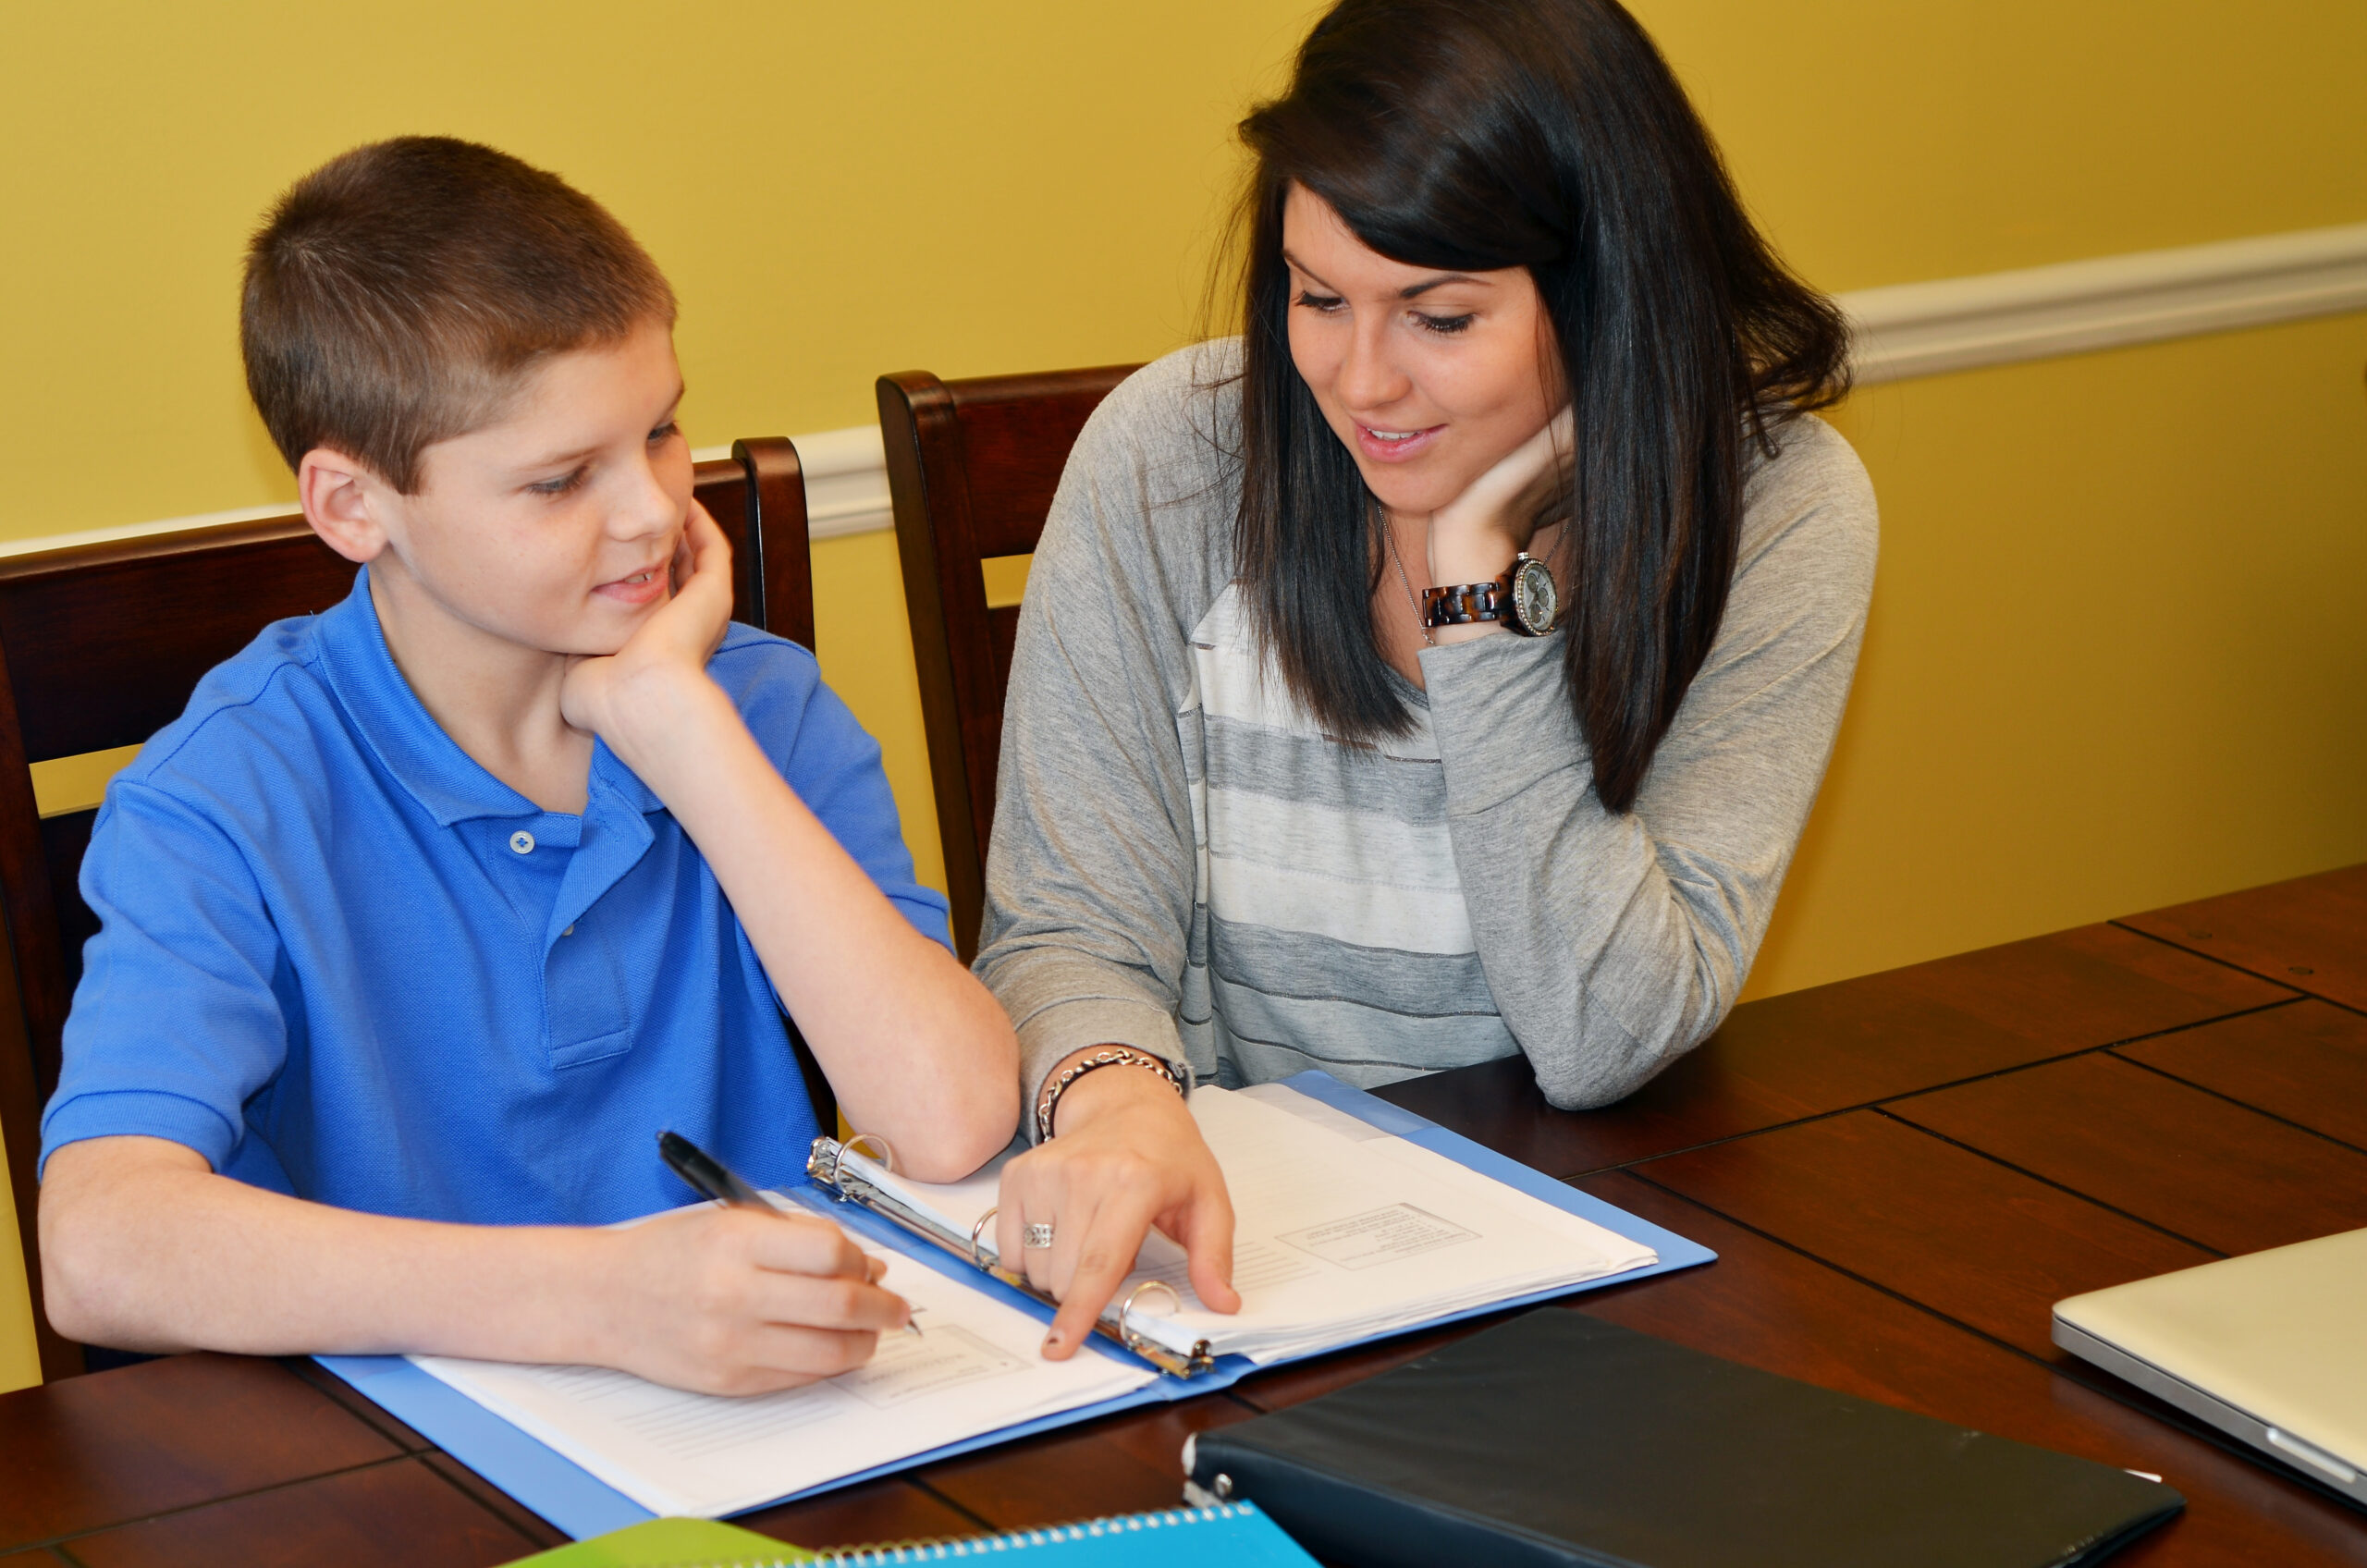 Finding Tutors for Children with Learning Differences